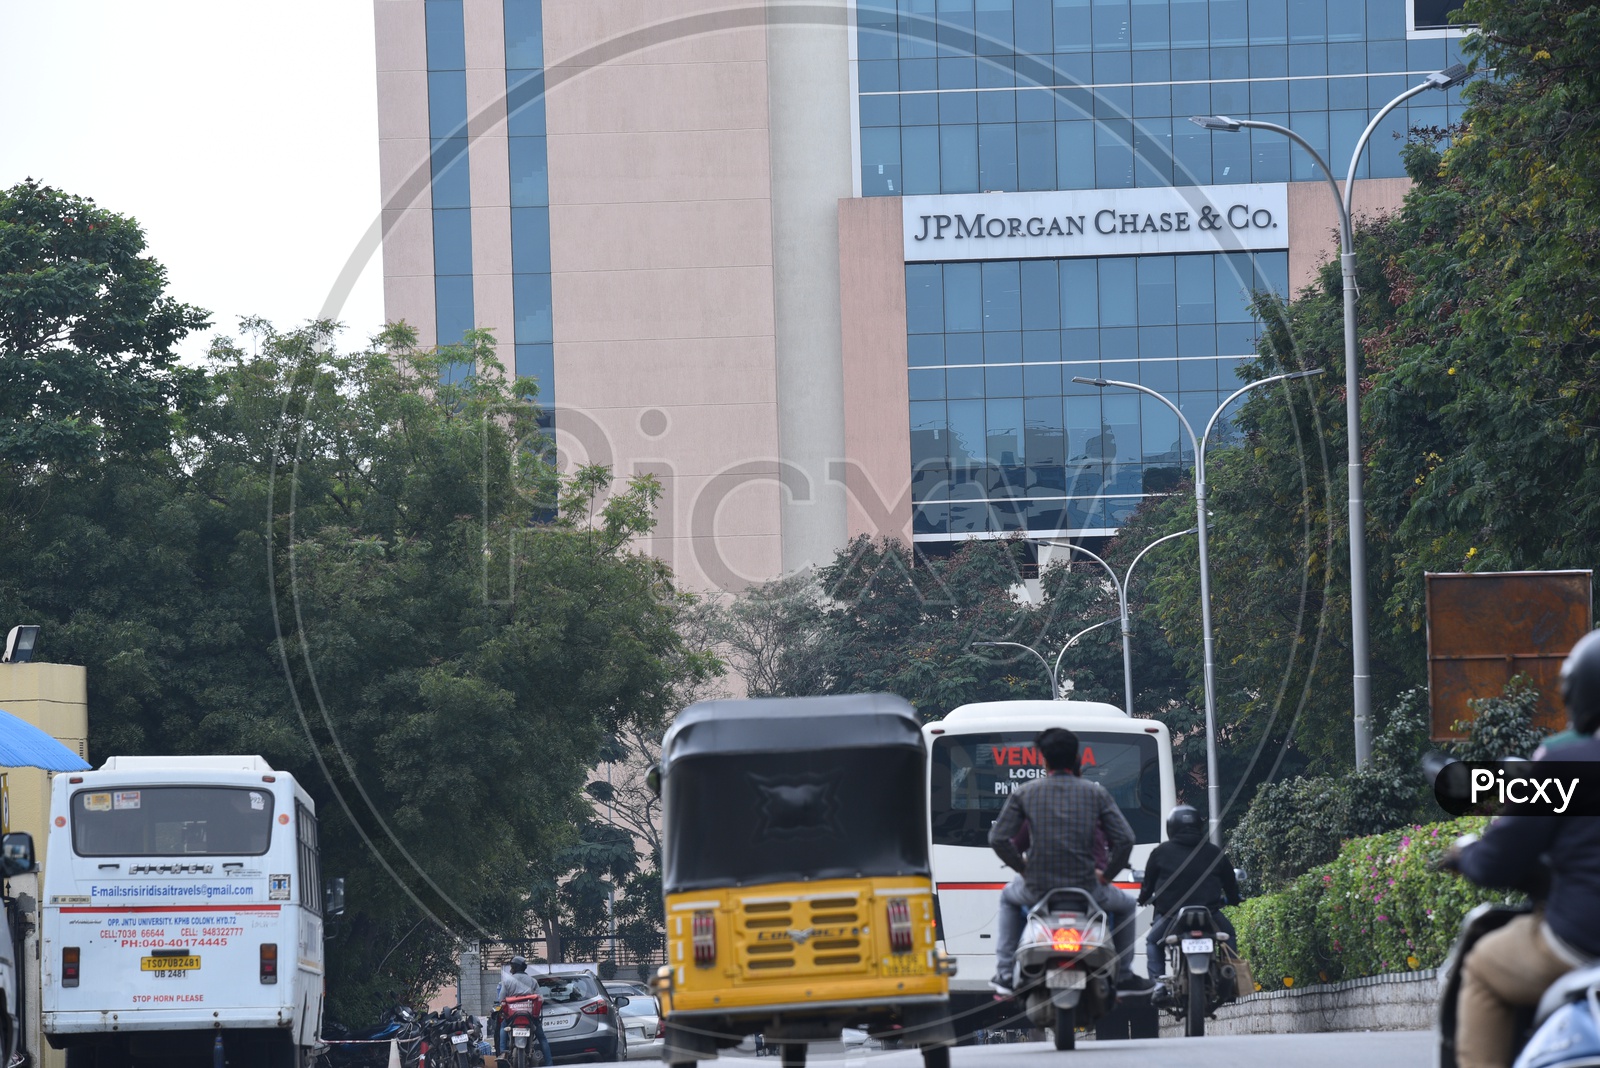 JPMorgan Chase & Co Sign Board and Building In Hyderabad